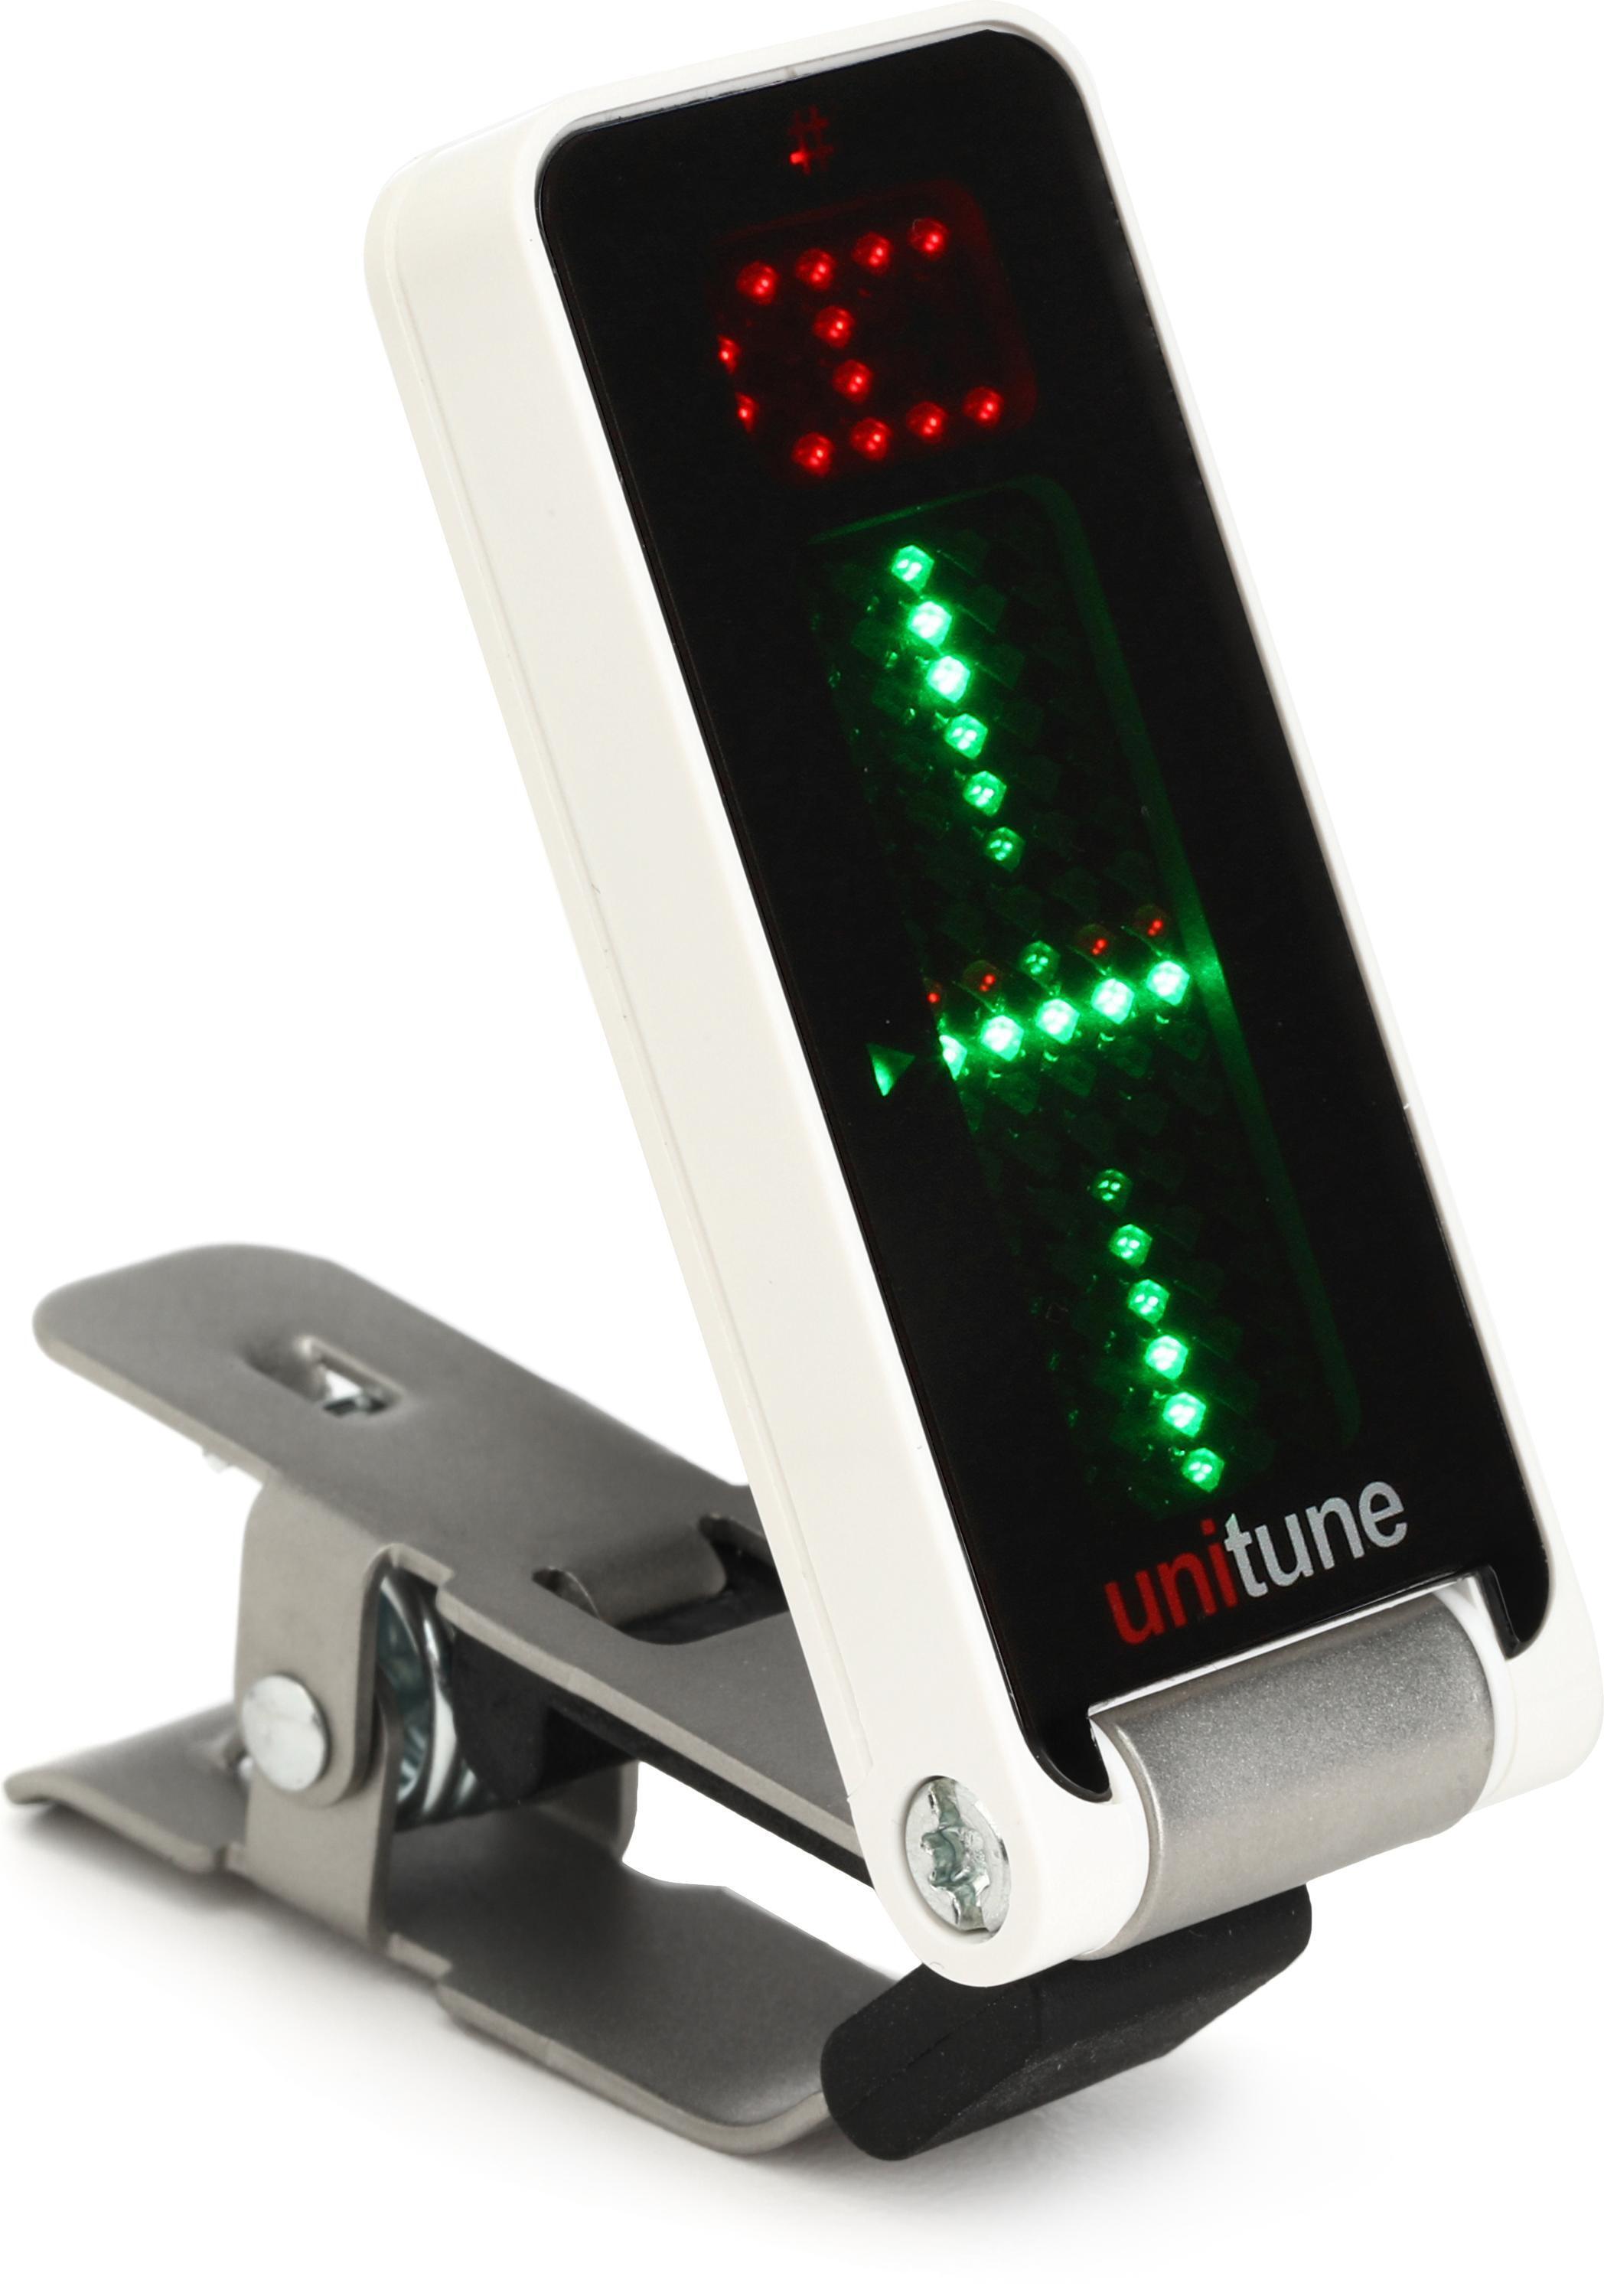 TC Electronic UniTune Clip Clip-on Chromatic Tuner Sweetwater Exclusive